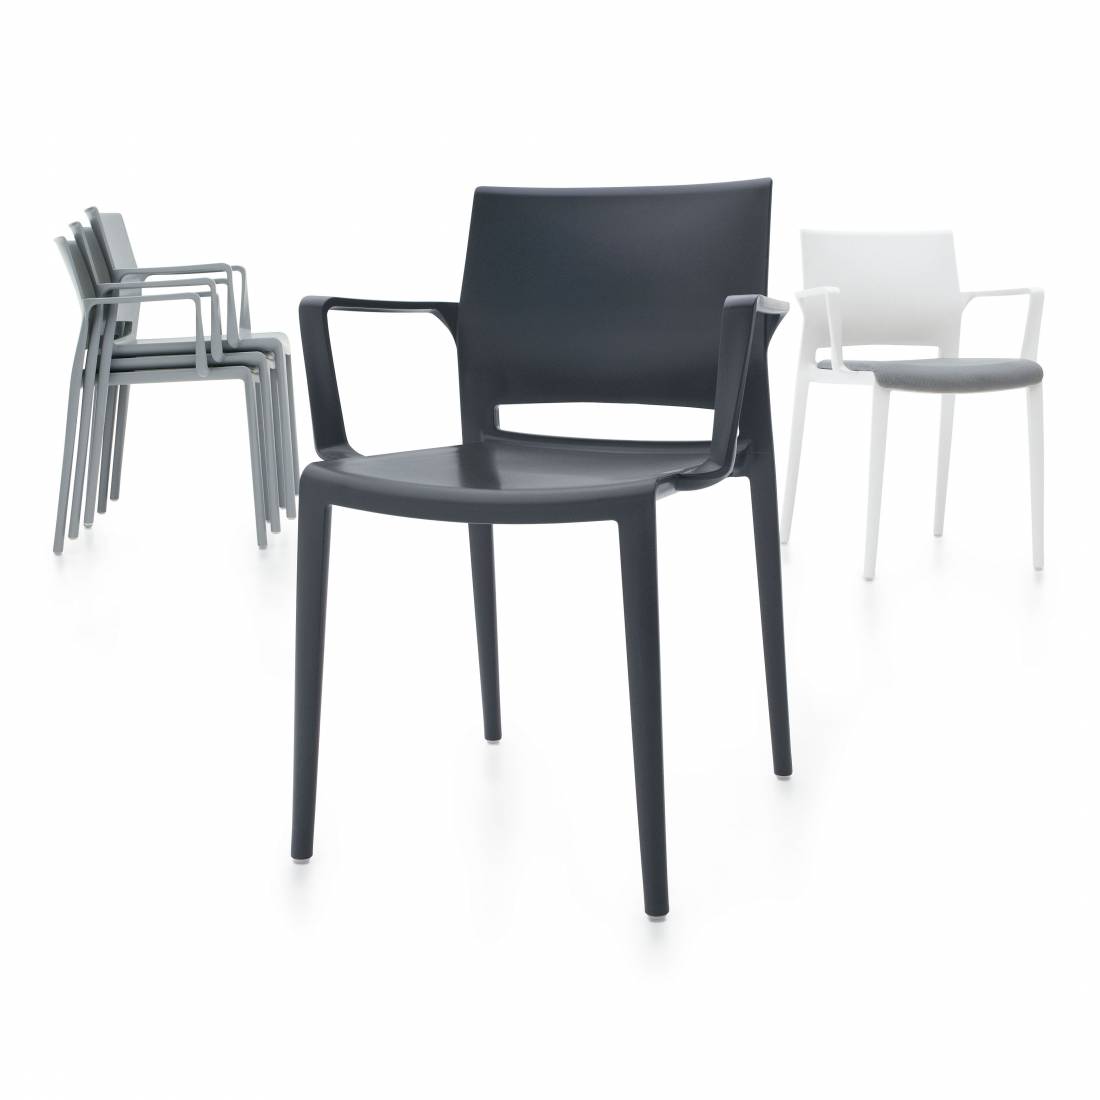 Global Furniture Group, Bakhita™ makes it easy for people to pull up a chair and chat or gather for a presentation. This